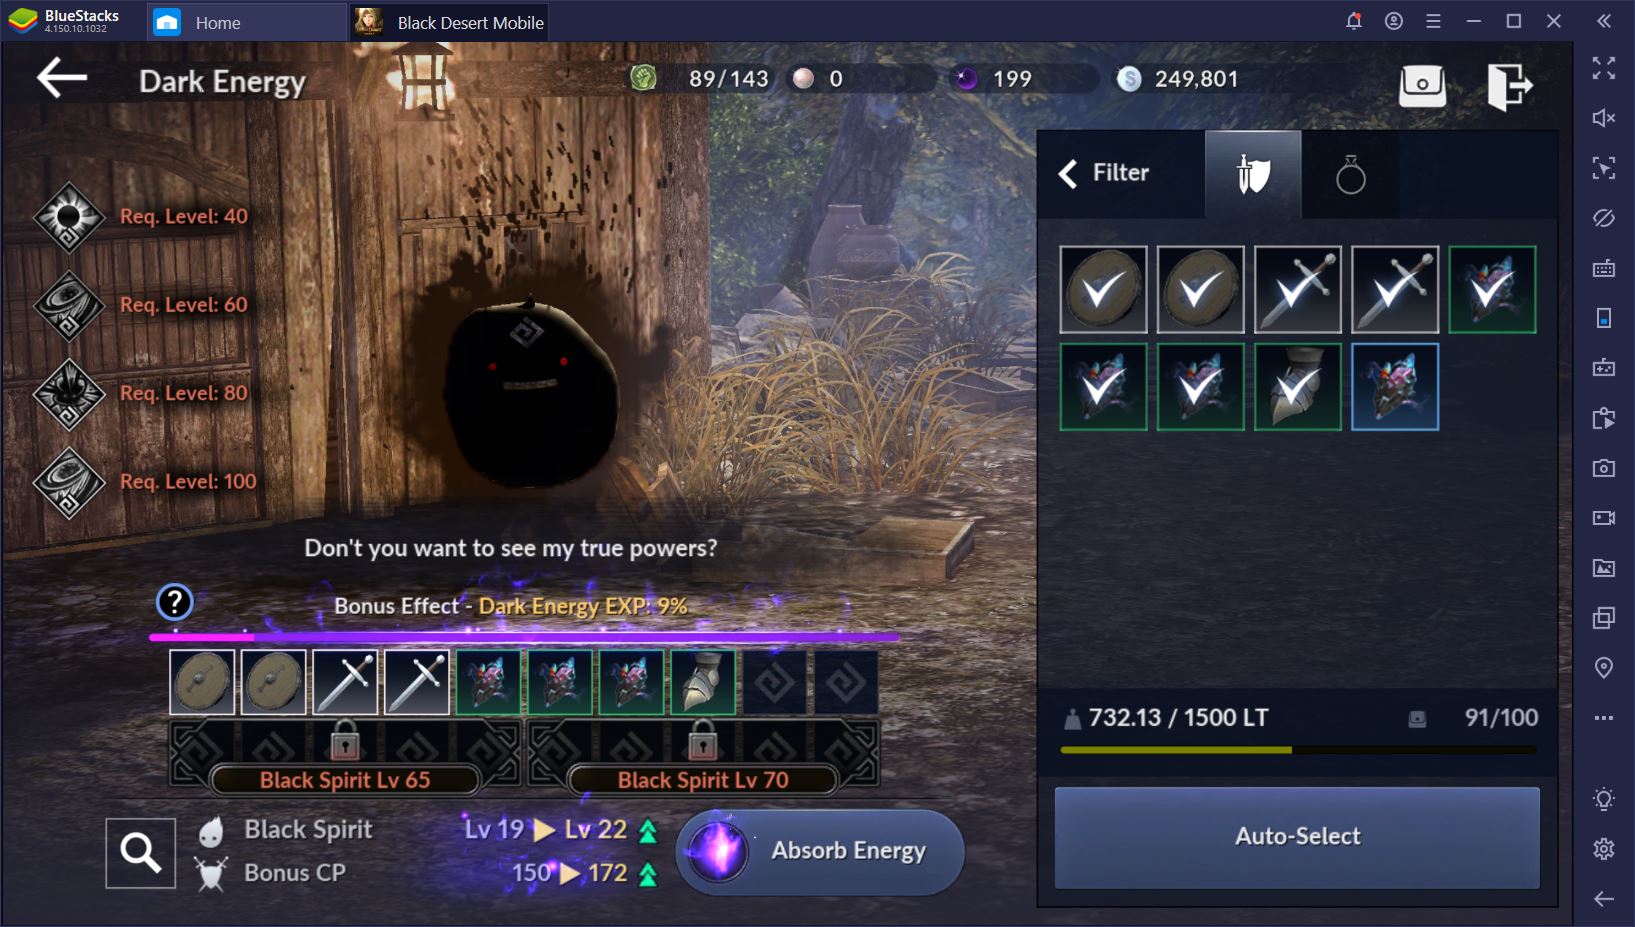 Black Desert Mobile: The Complete Guide to Character Improvement